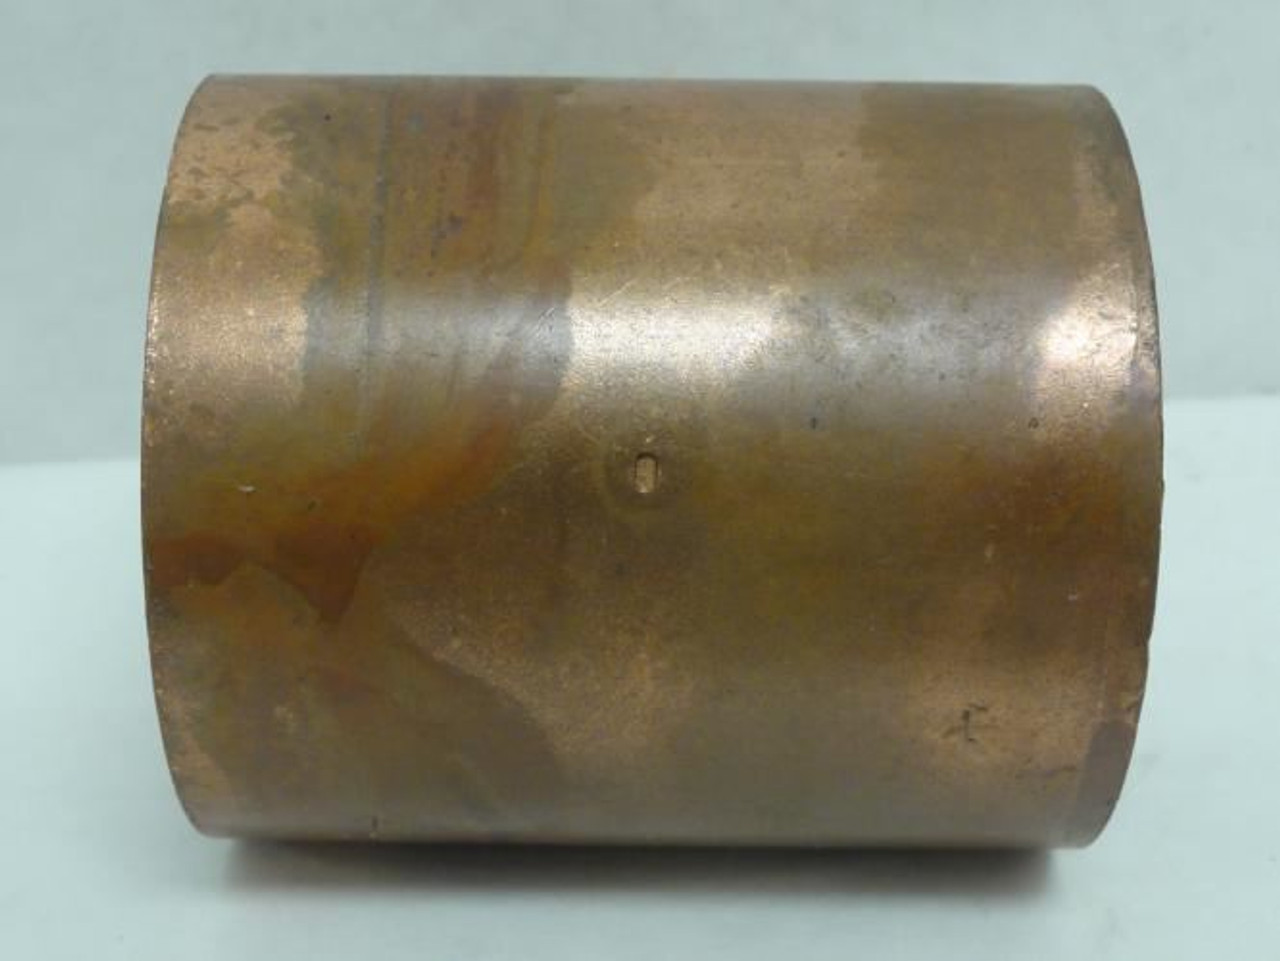 Nibco U600 2-1/2; Wrot Copper Coupling Dimpled Tube Stop; 2-1/2"